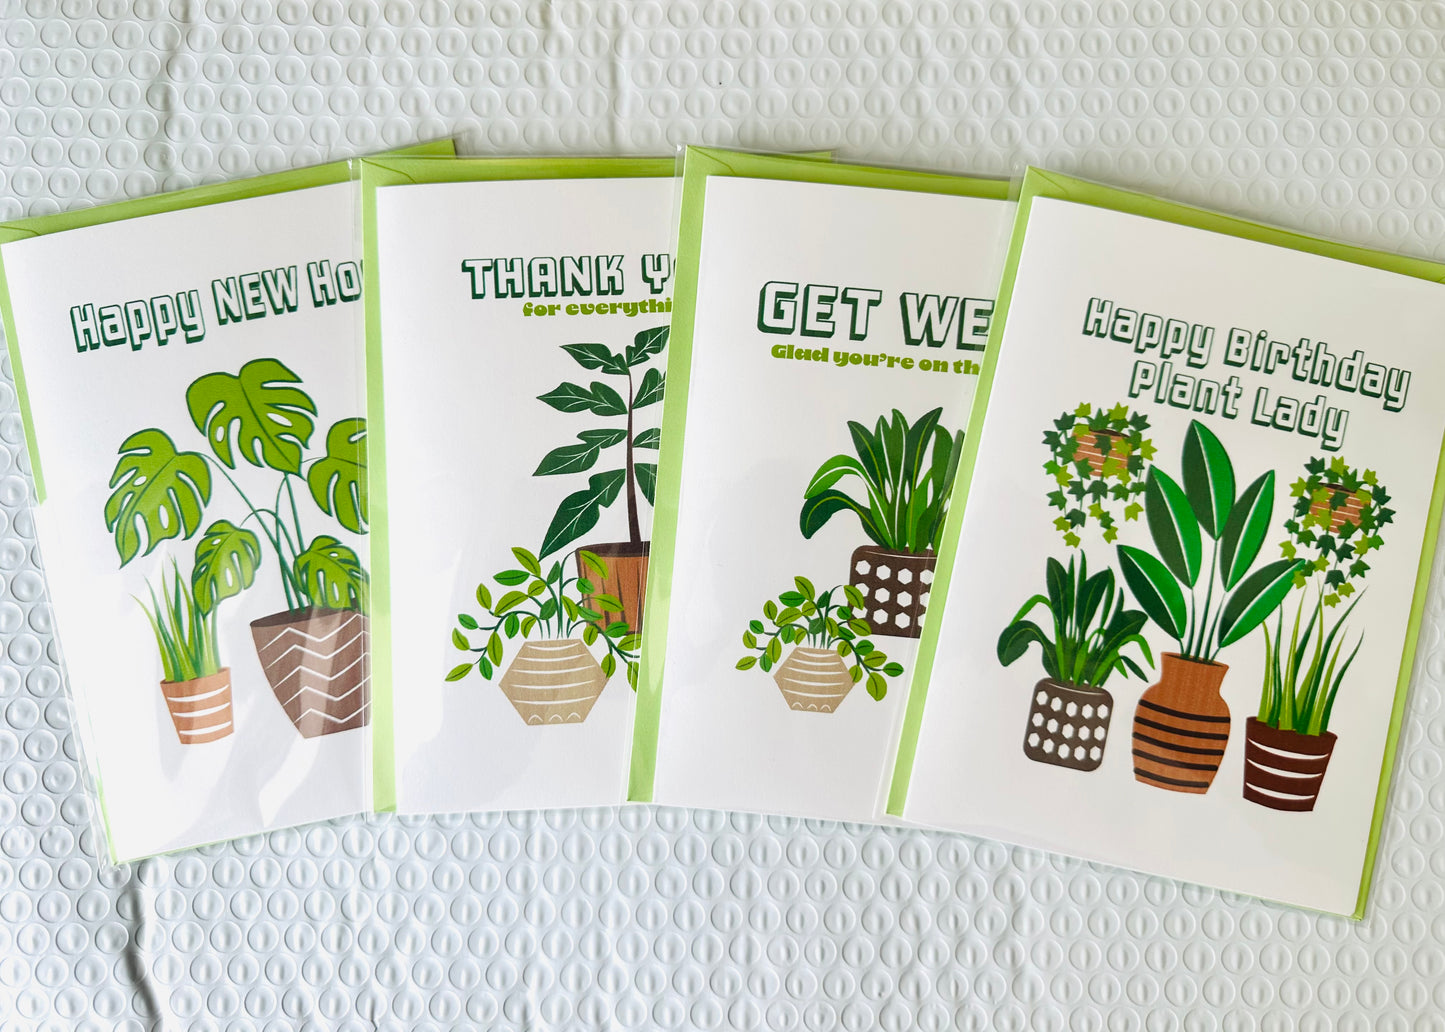 Get Well! Glad you're on the mend ! 5X7 Greeting card for those plant people in our lives